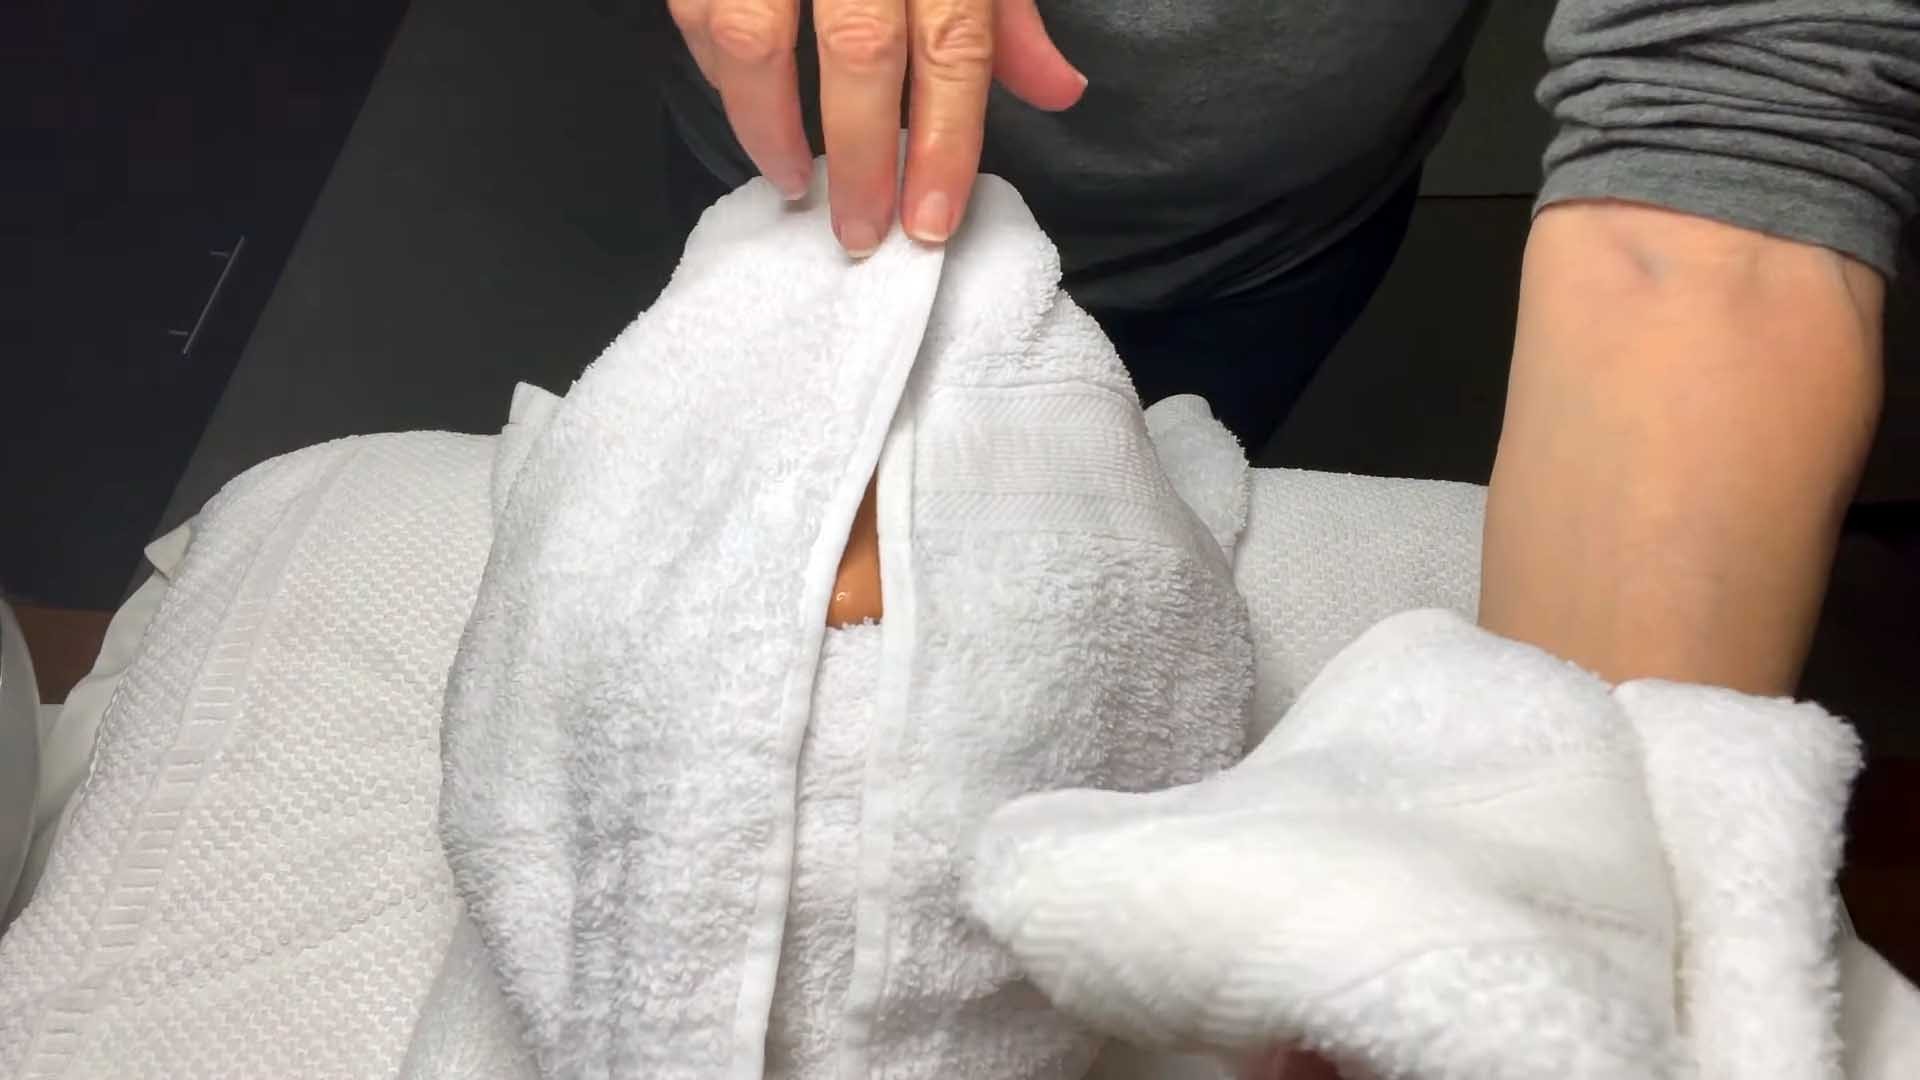 Does Putting A Hot Towel On A Pimple Work?